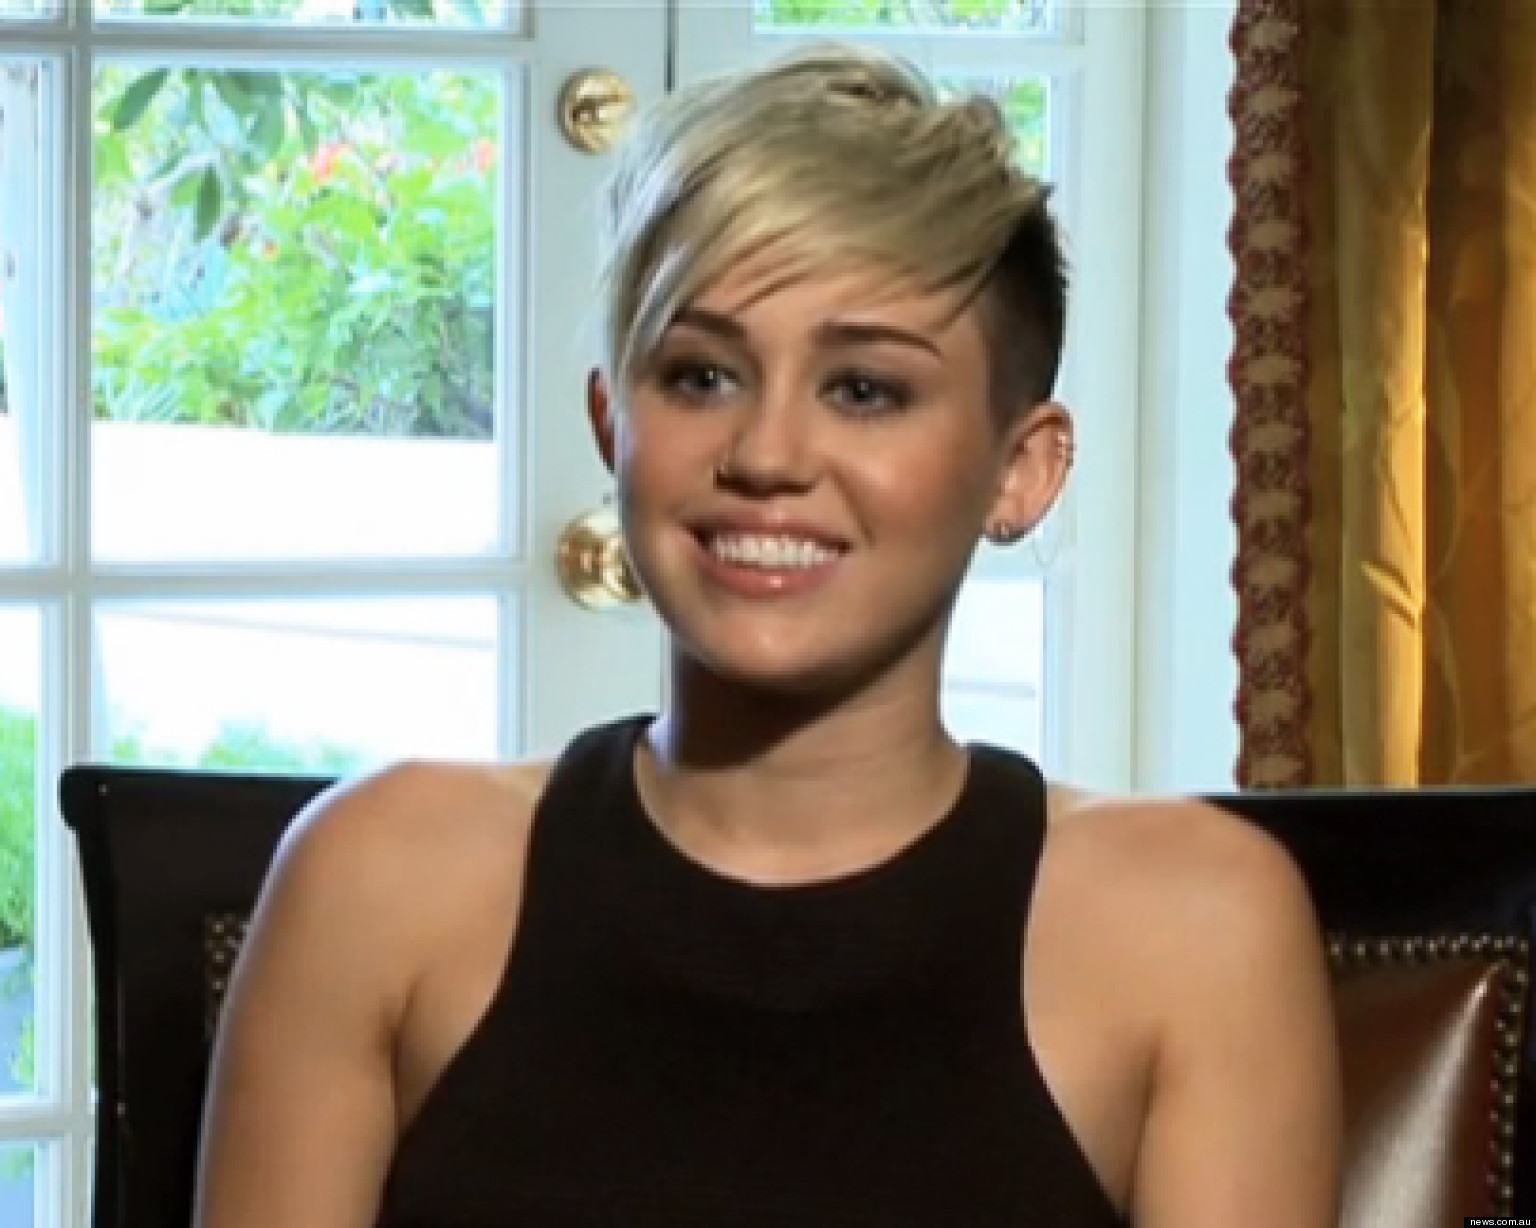 Miley Cyrus' Short Hair Is Here To Stay: 'I Could Never See Myself With ...